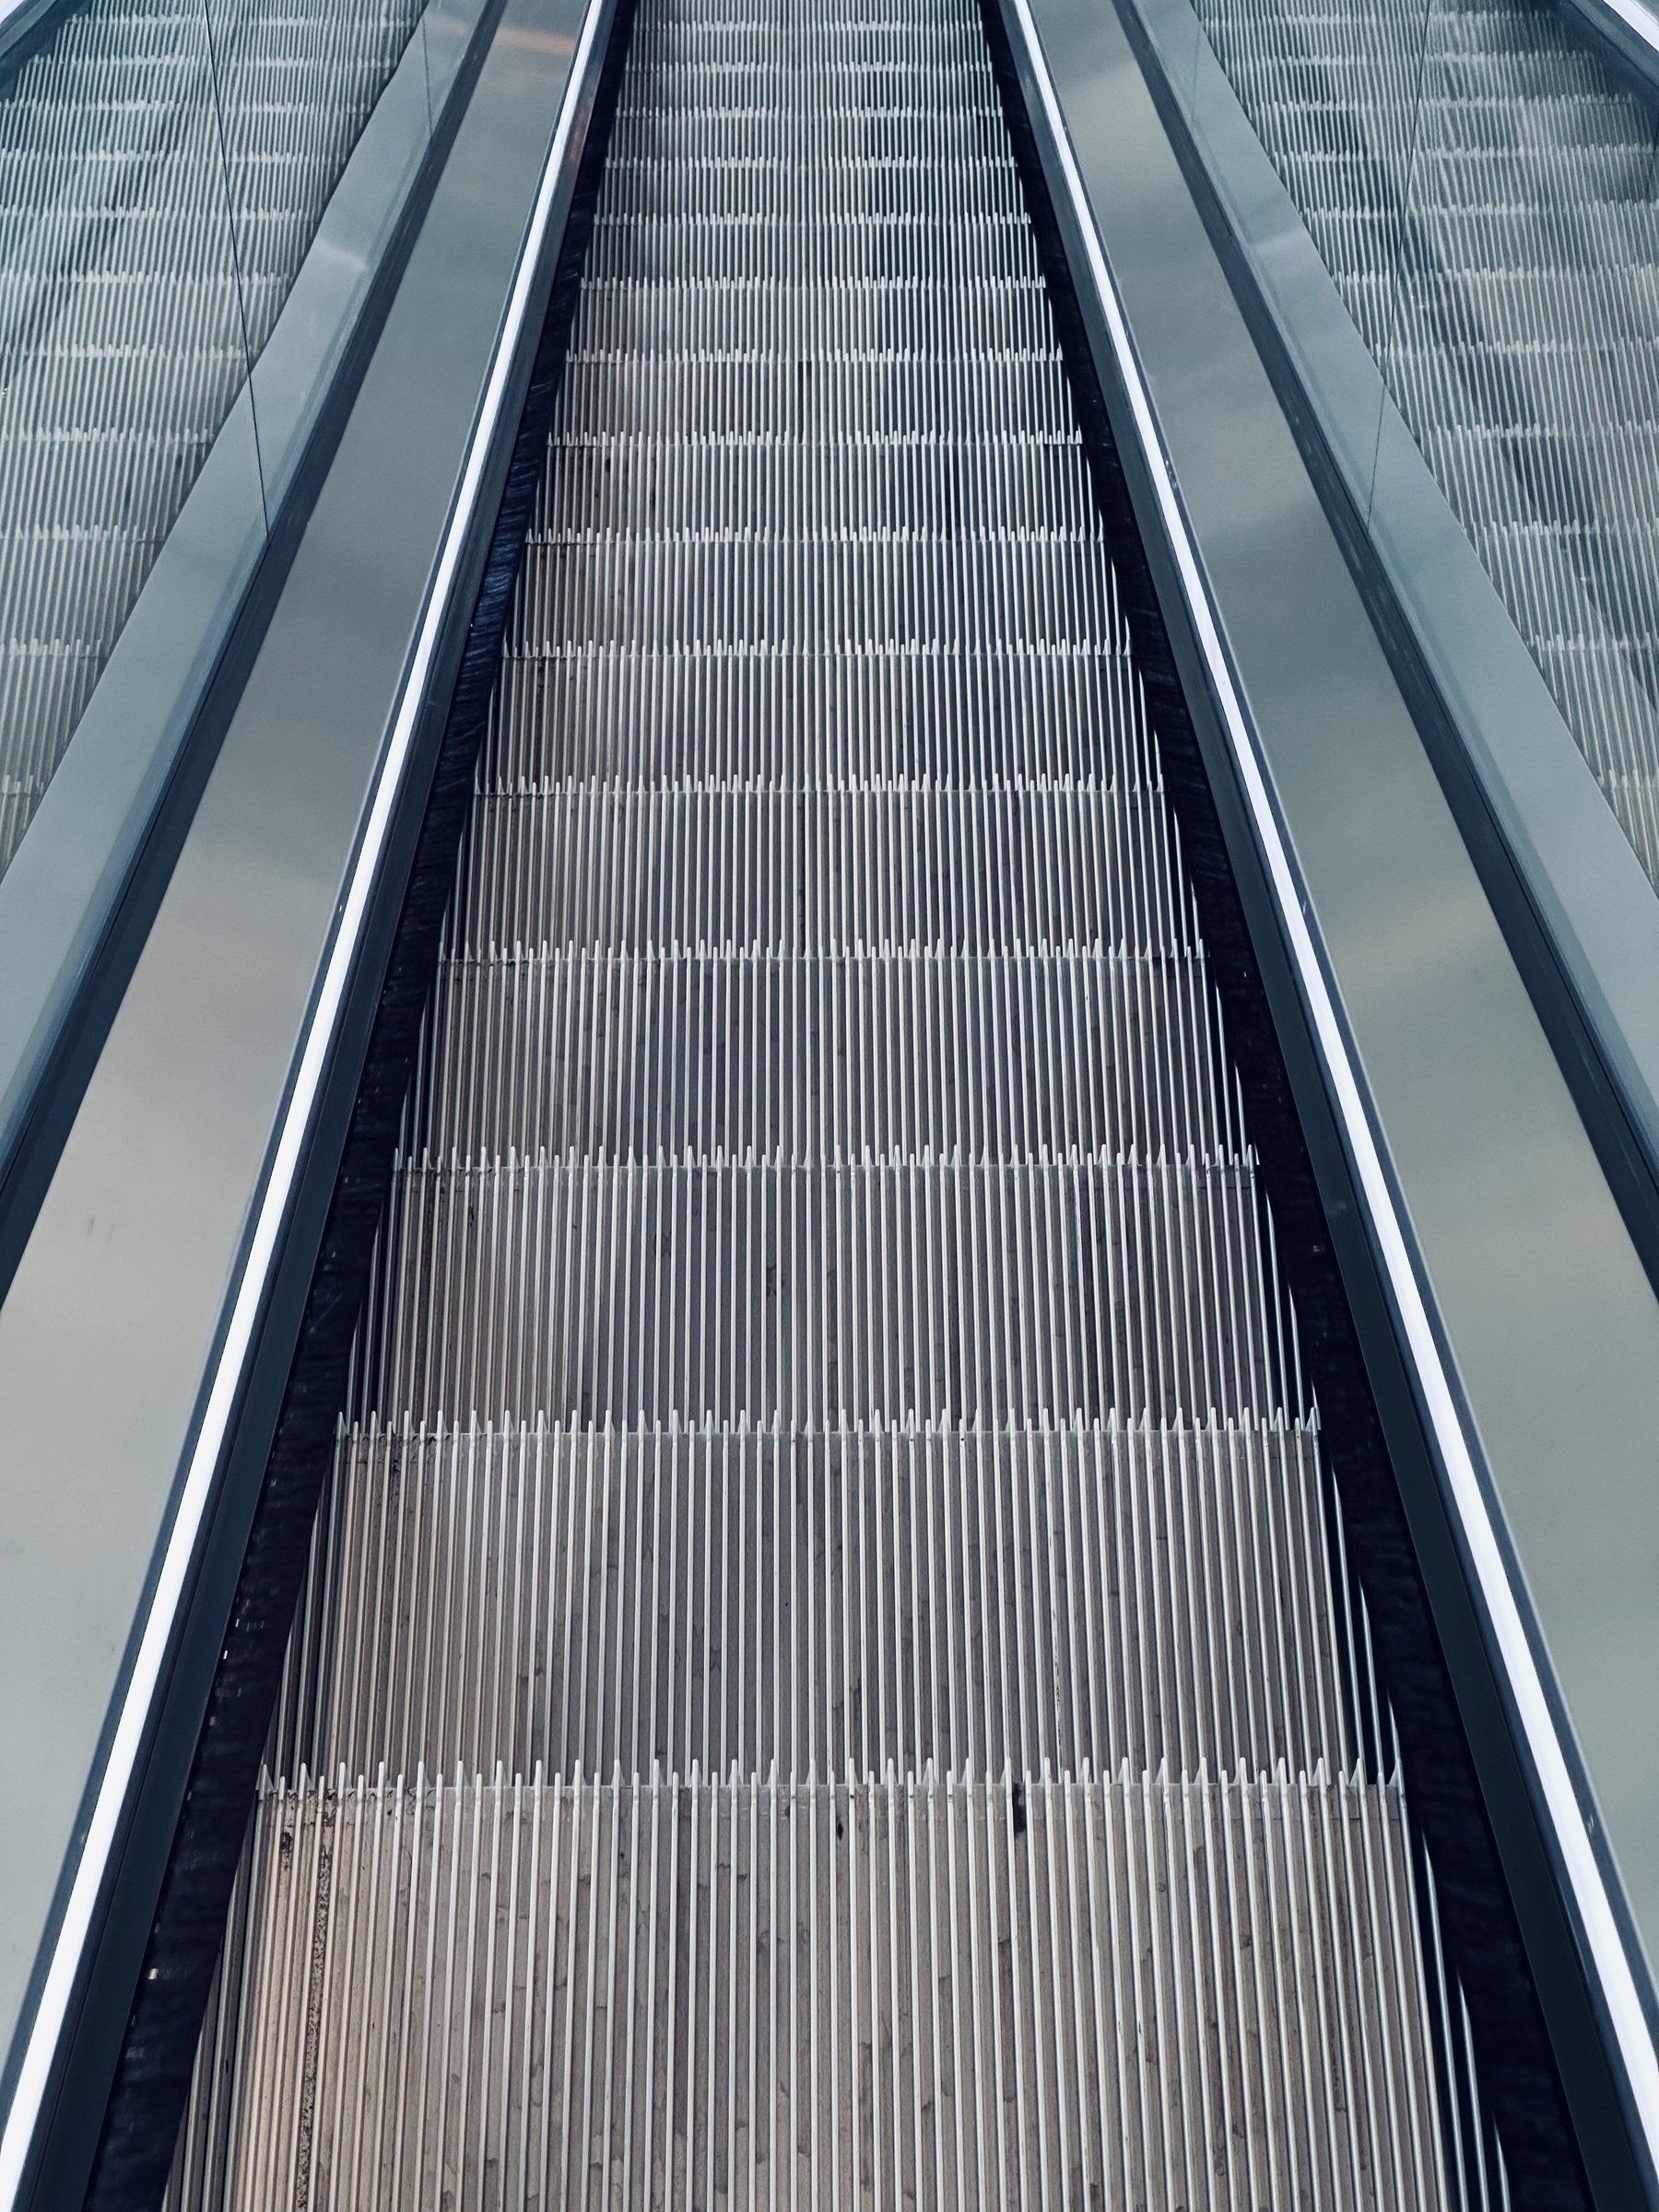 An escalator at the Munch museum in Oslo.